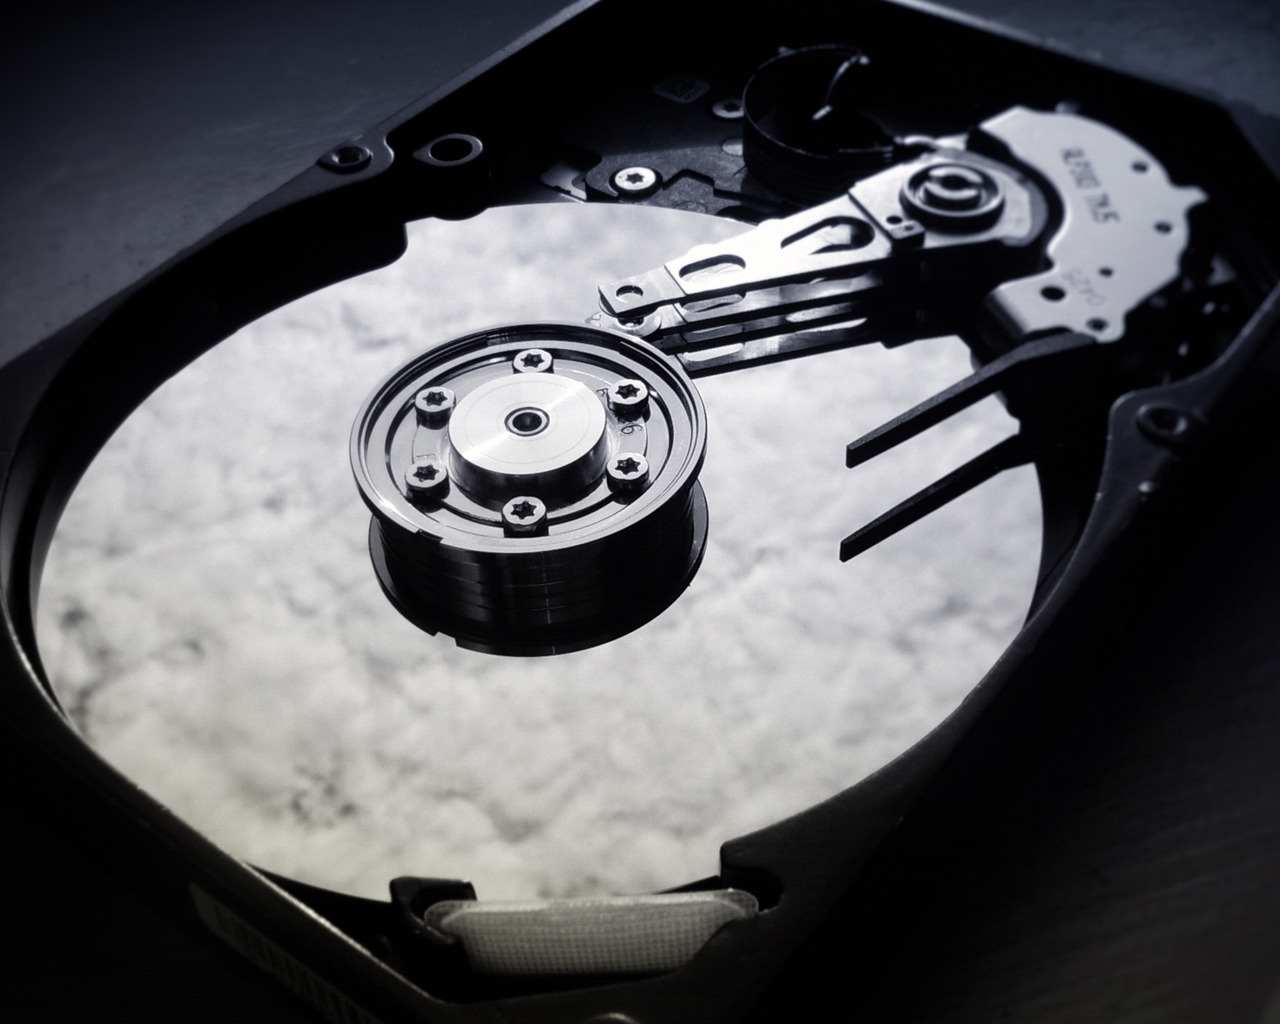 Hard Disk Drive for 1280 x 1024 resolution